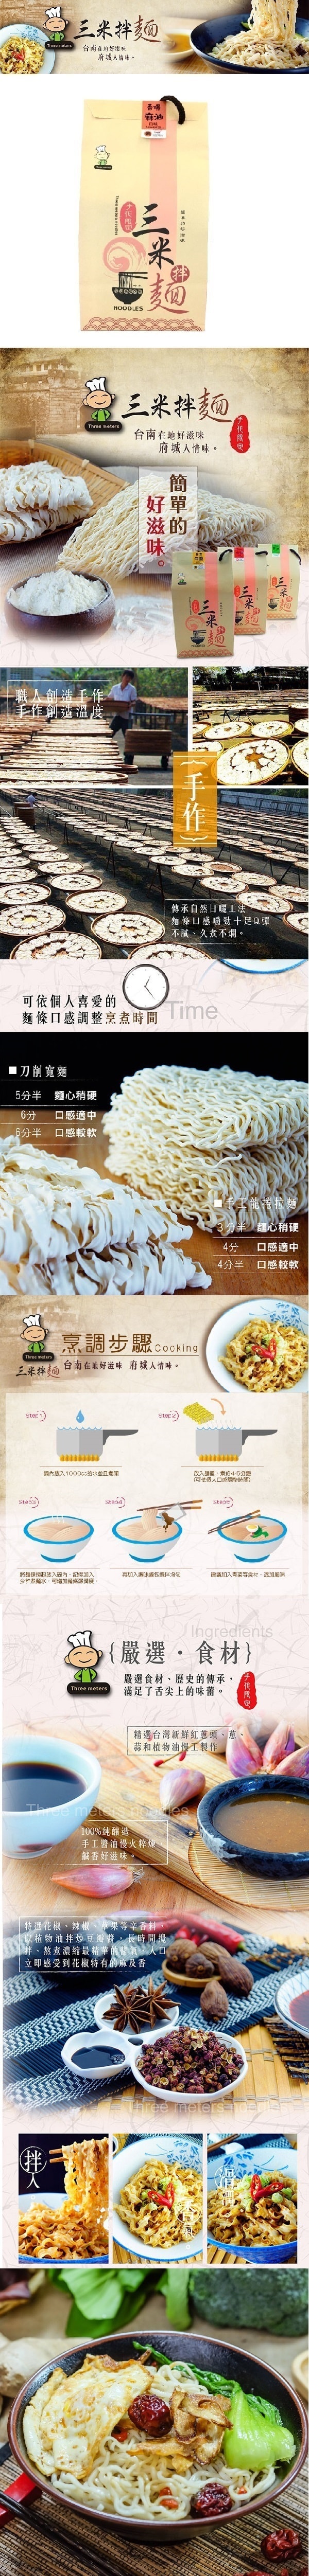 [Taiwan Direct Mail] Sanmi Mixed Noodles Dry Mixed Noodles with Fried Sesame Oil 520g 4pcs